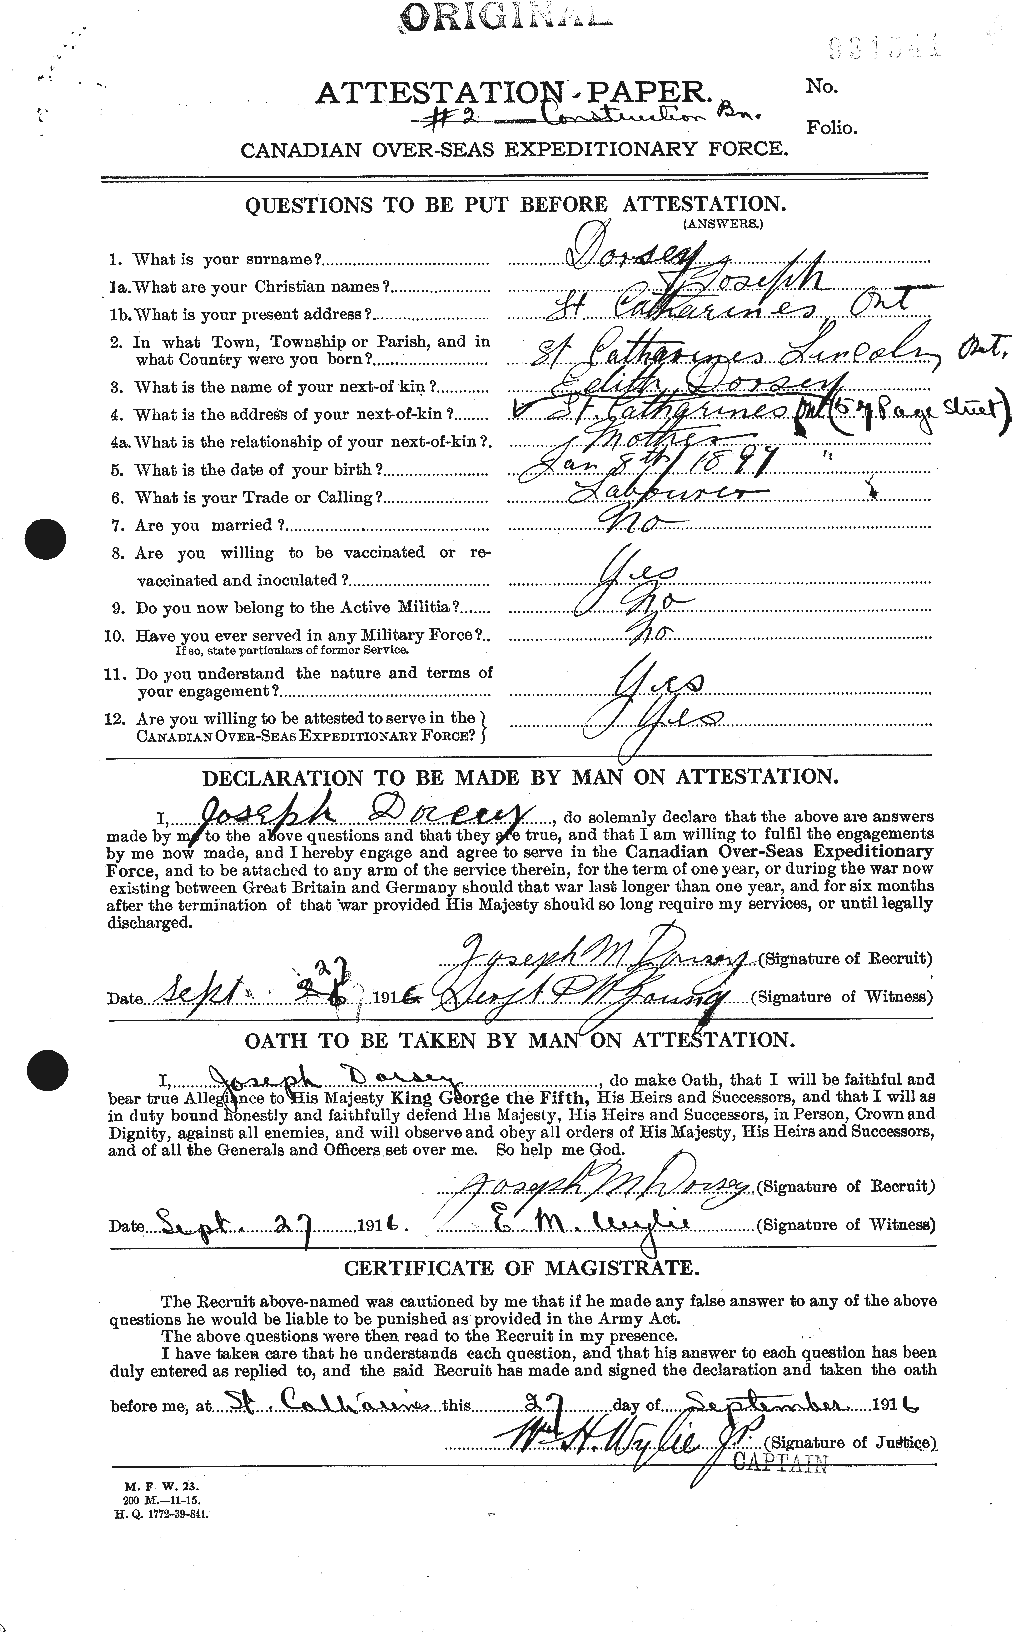 Personnel Records of the First World War - CEF 291269a